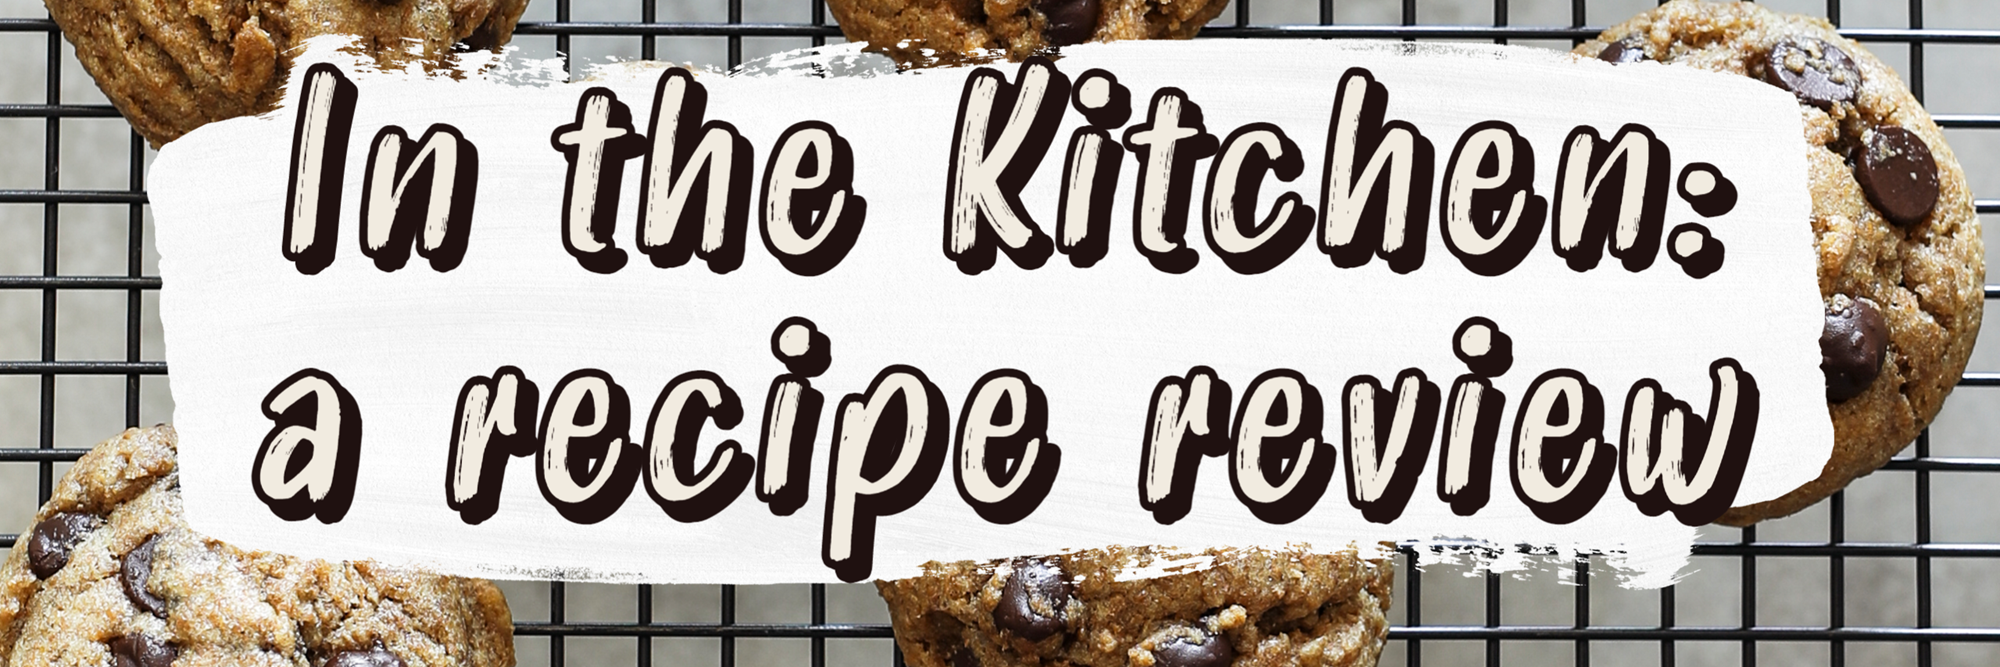 Text reads "In the Kitchen: a recipe review". 